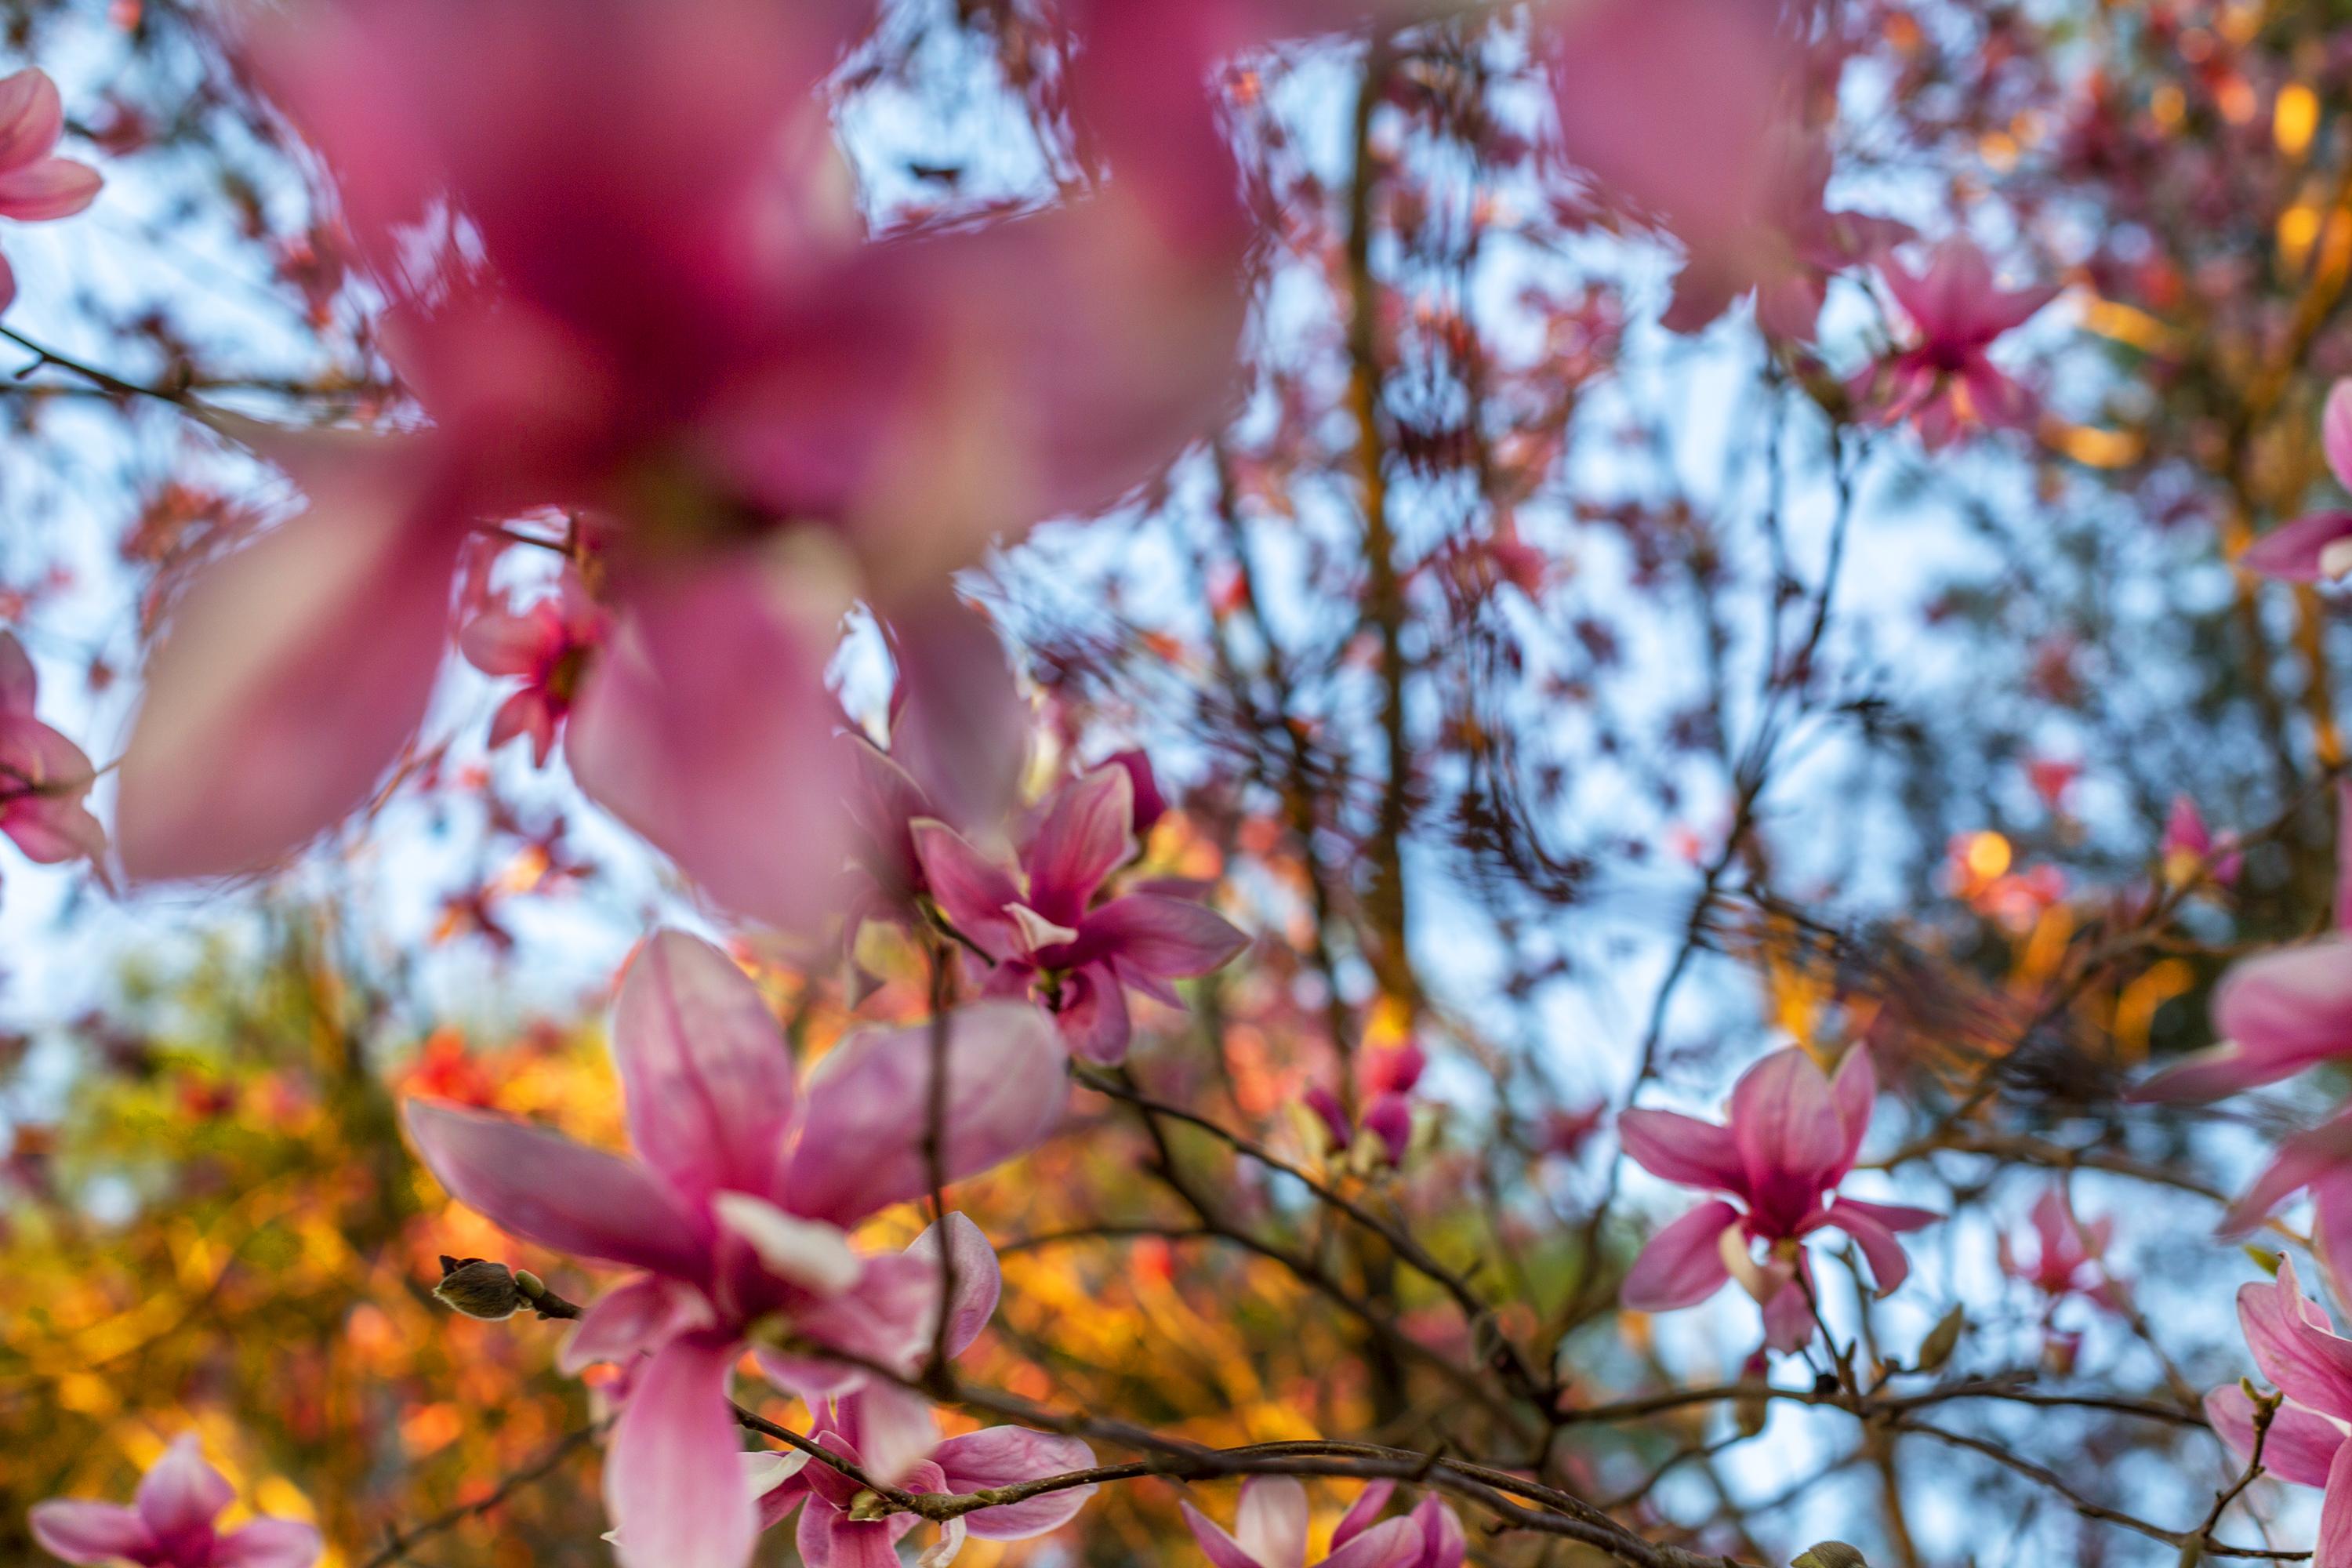 Thad Lee Landscape Photograph - 'A Swarm of Spring Magnolias' - abstract landscape photography, colorful